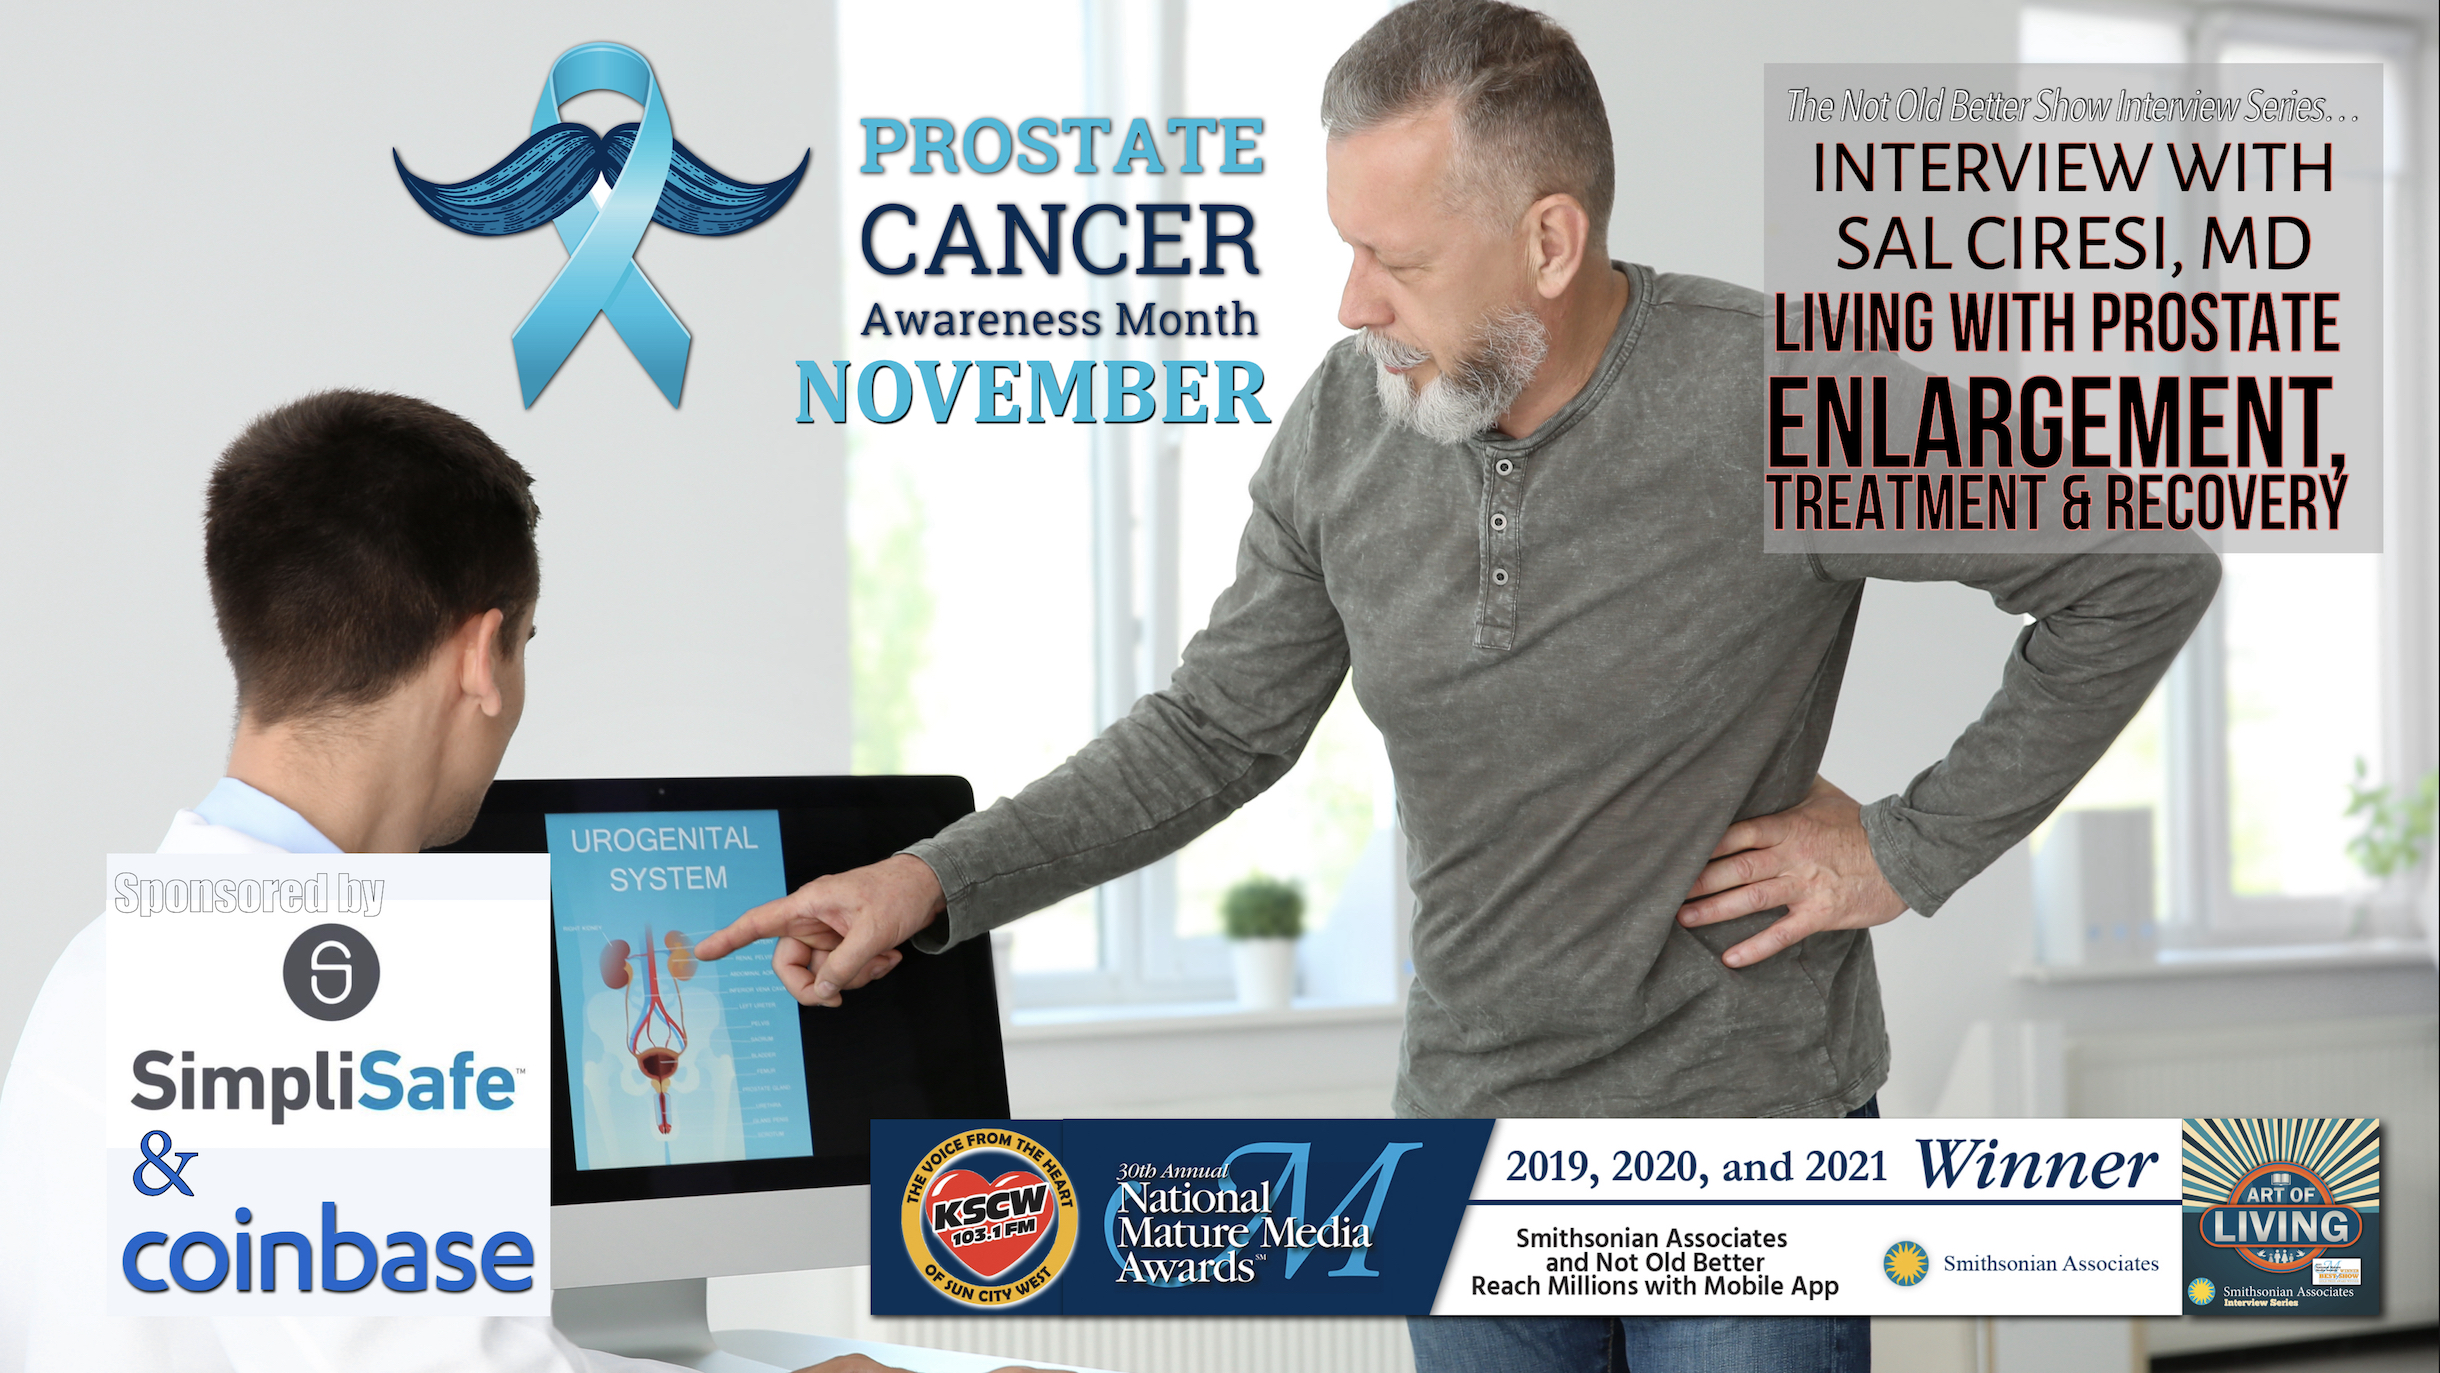 Prostate Health – Treatment, Survival & Recovery with Sal Ciresi, MD